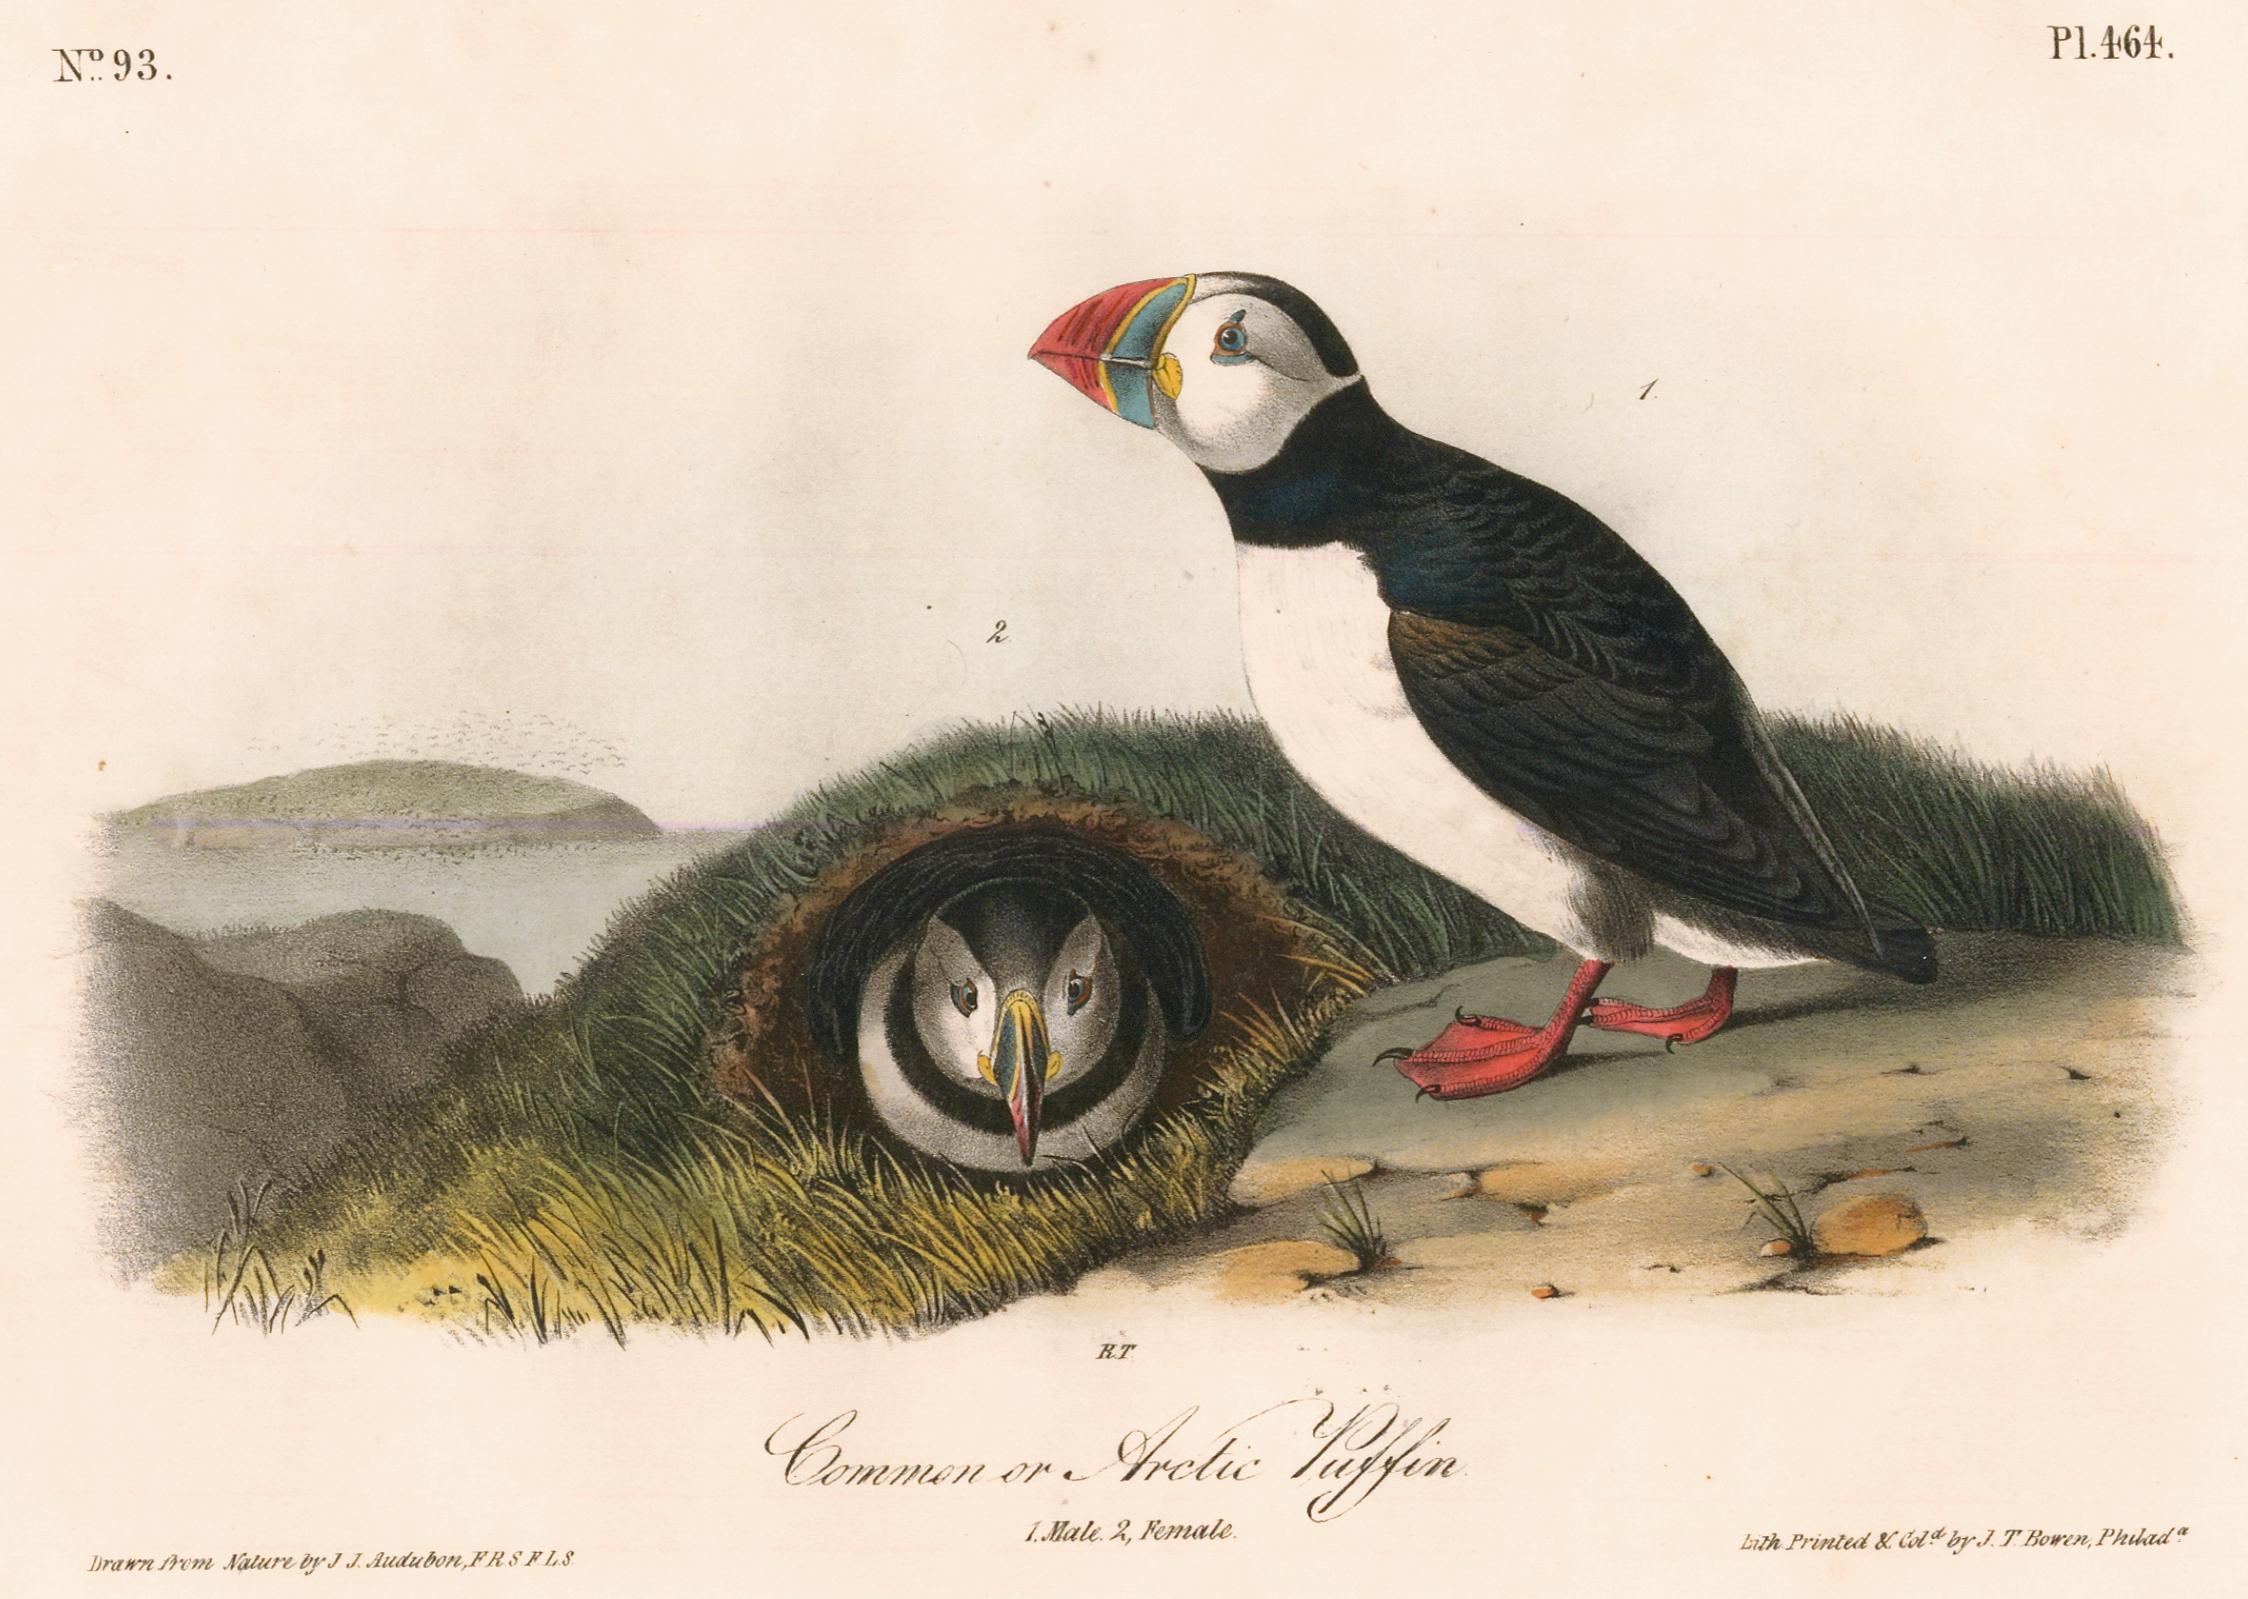 How can I tell if my Audubon print is real?